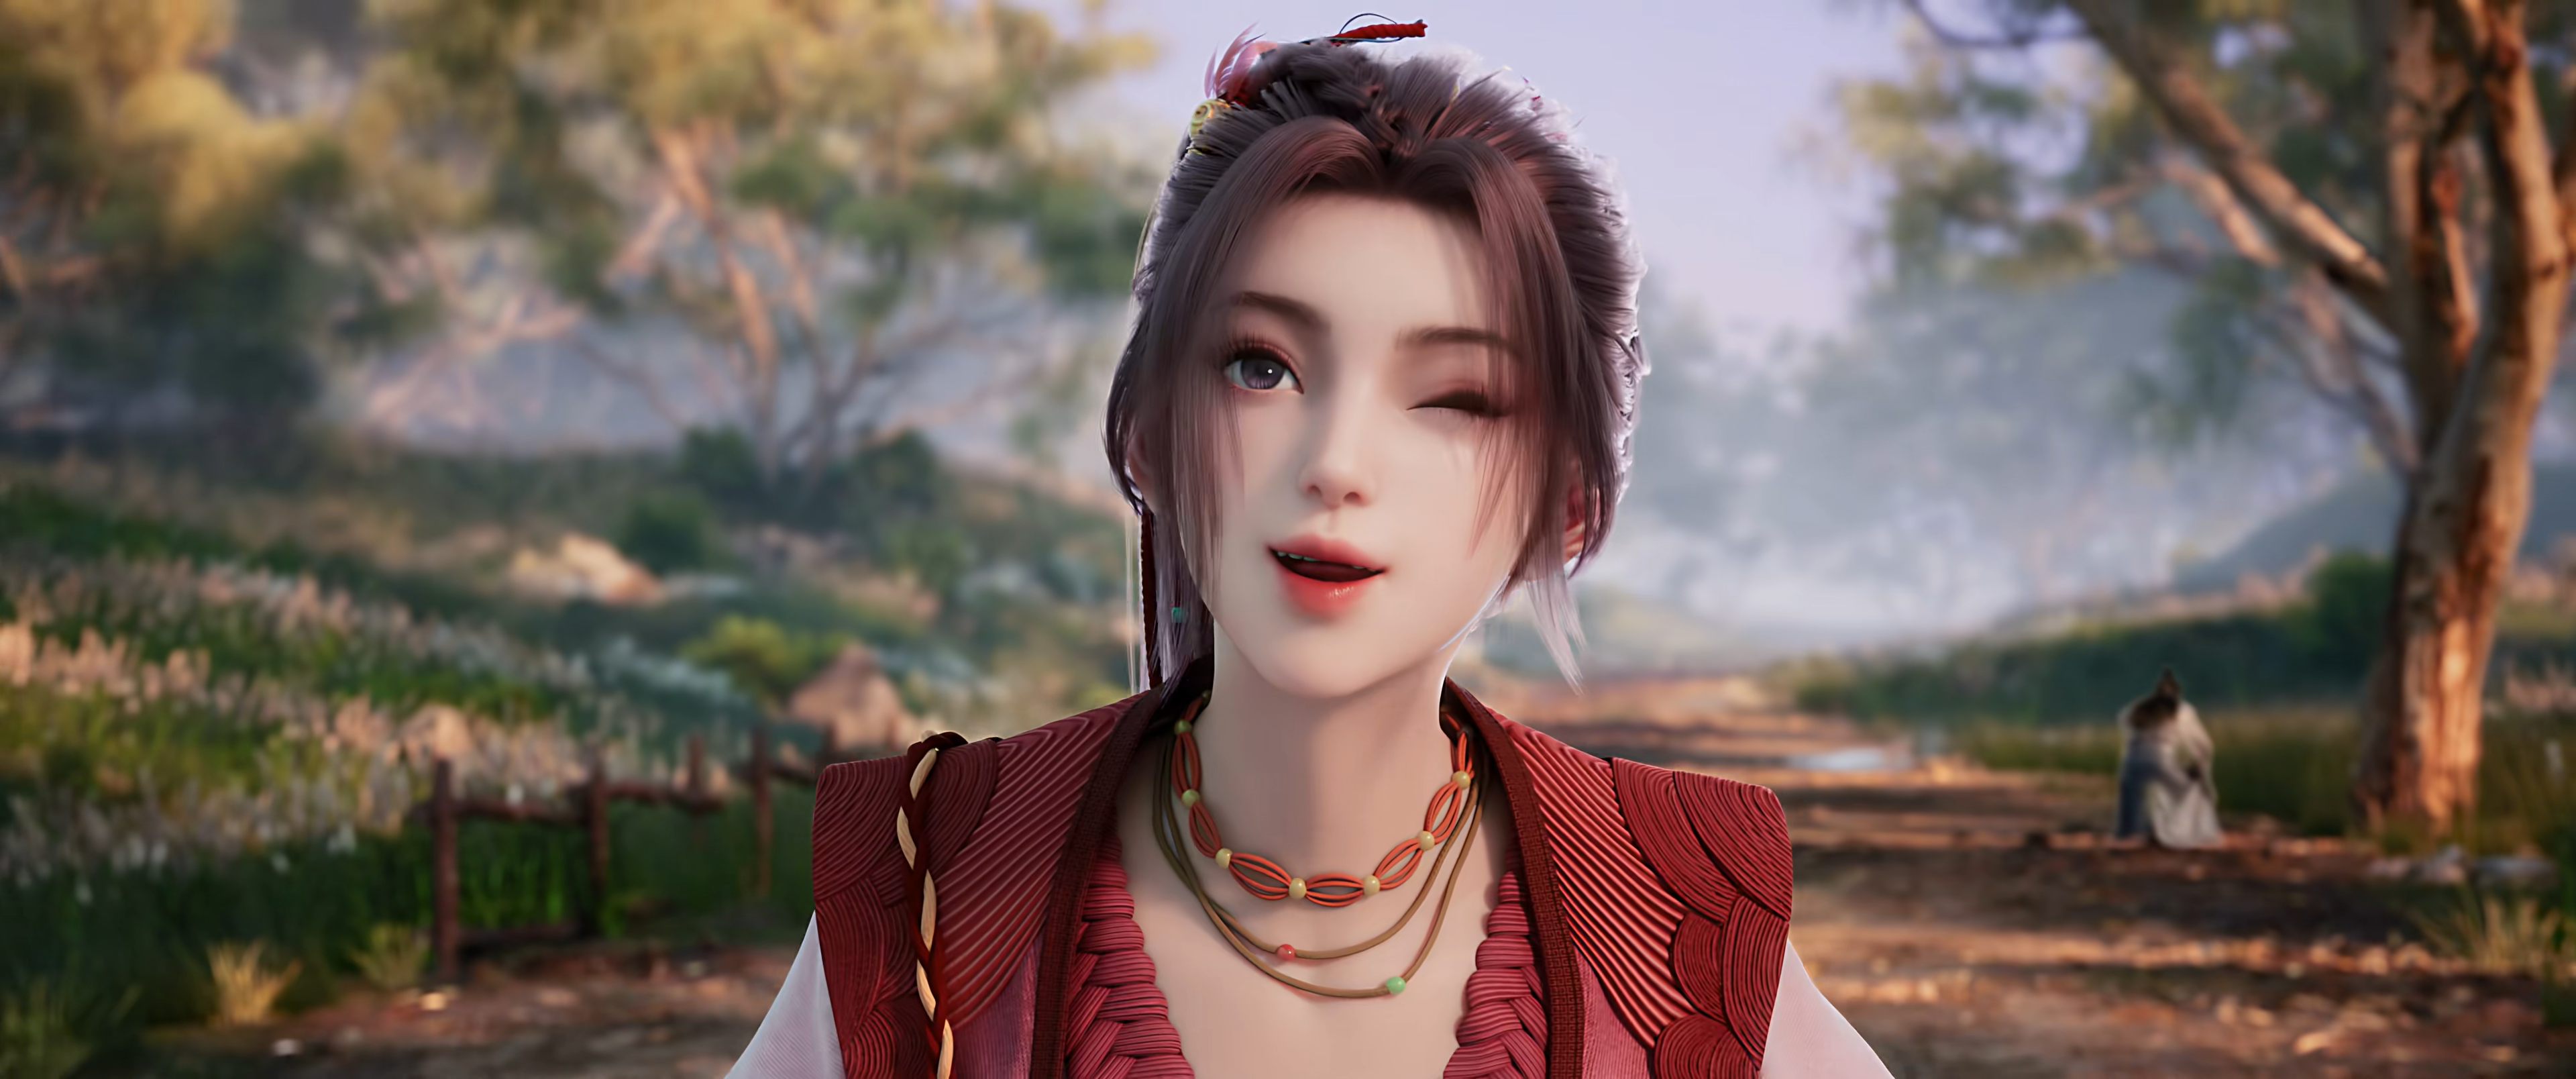 General 3840x1608 Zhu Xian one eye closed fantasy girl fantasy art blurry background trees looking at viewer smiling short hair open mouth brunette brown eyes Chinese cartoon CGI wide screen screen shot